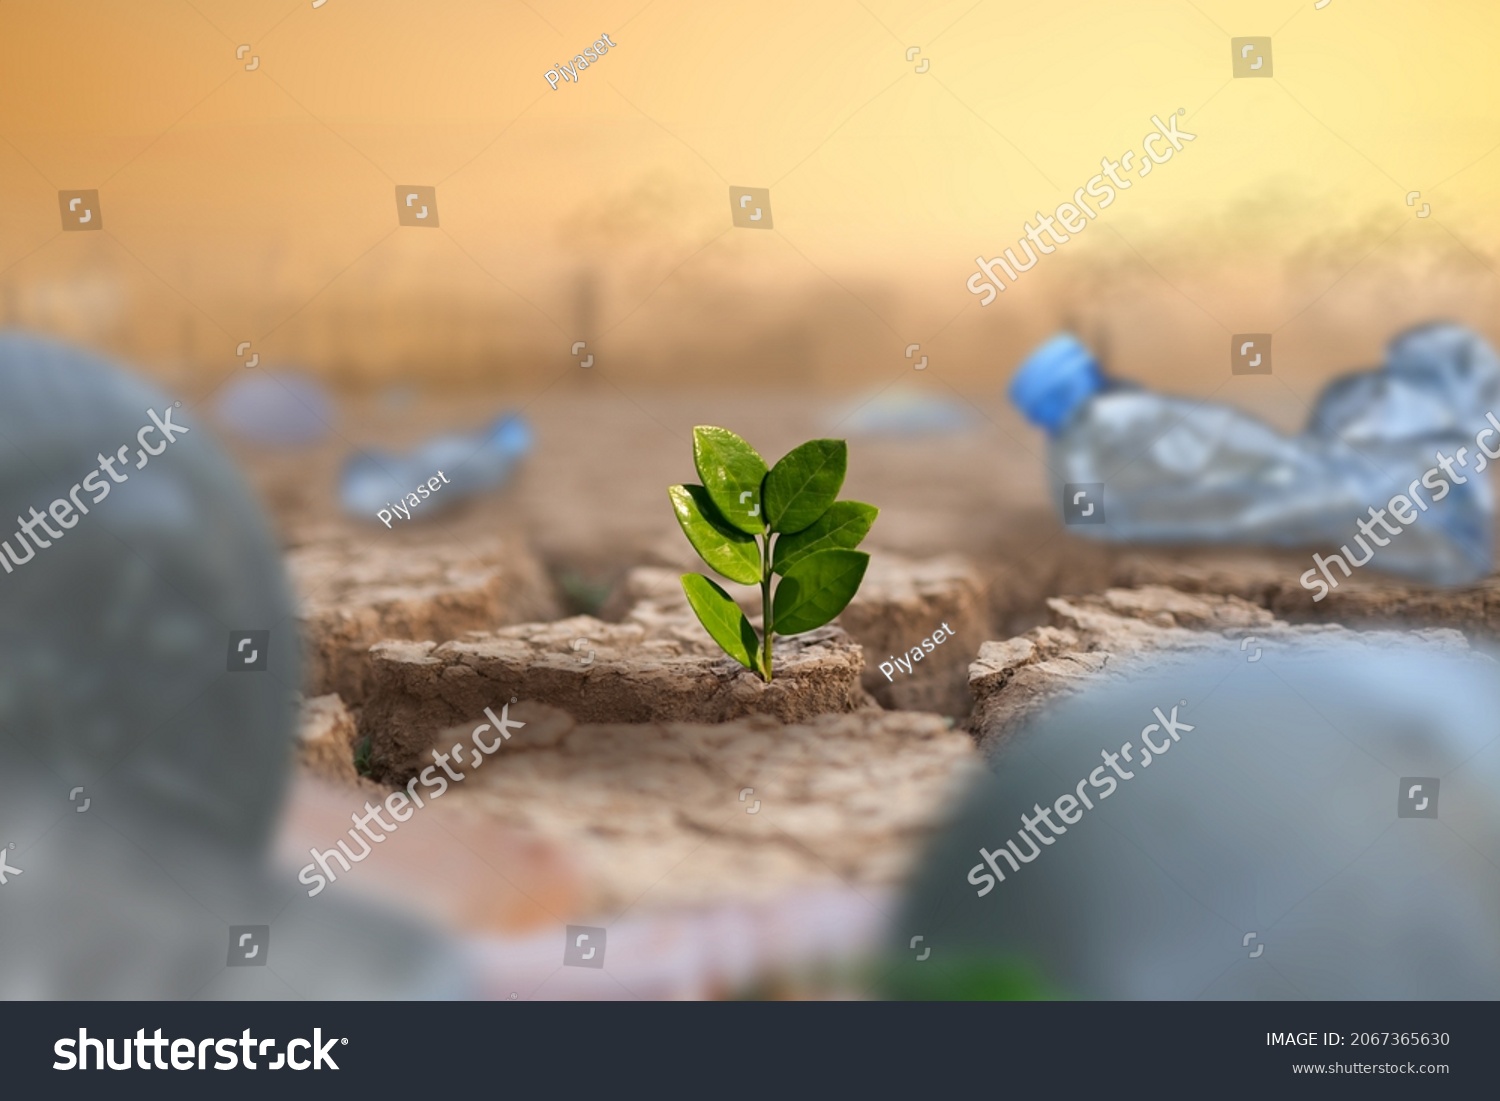 Green plant growing on dry cracked earth surrounded by waste of plastic bottle and polluted city and industry on background. Co2, Climate change and Plastic is impact to mother earth concept. #2067365630